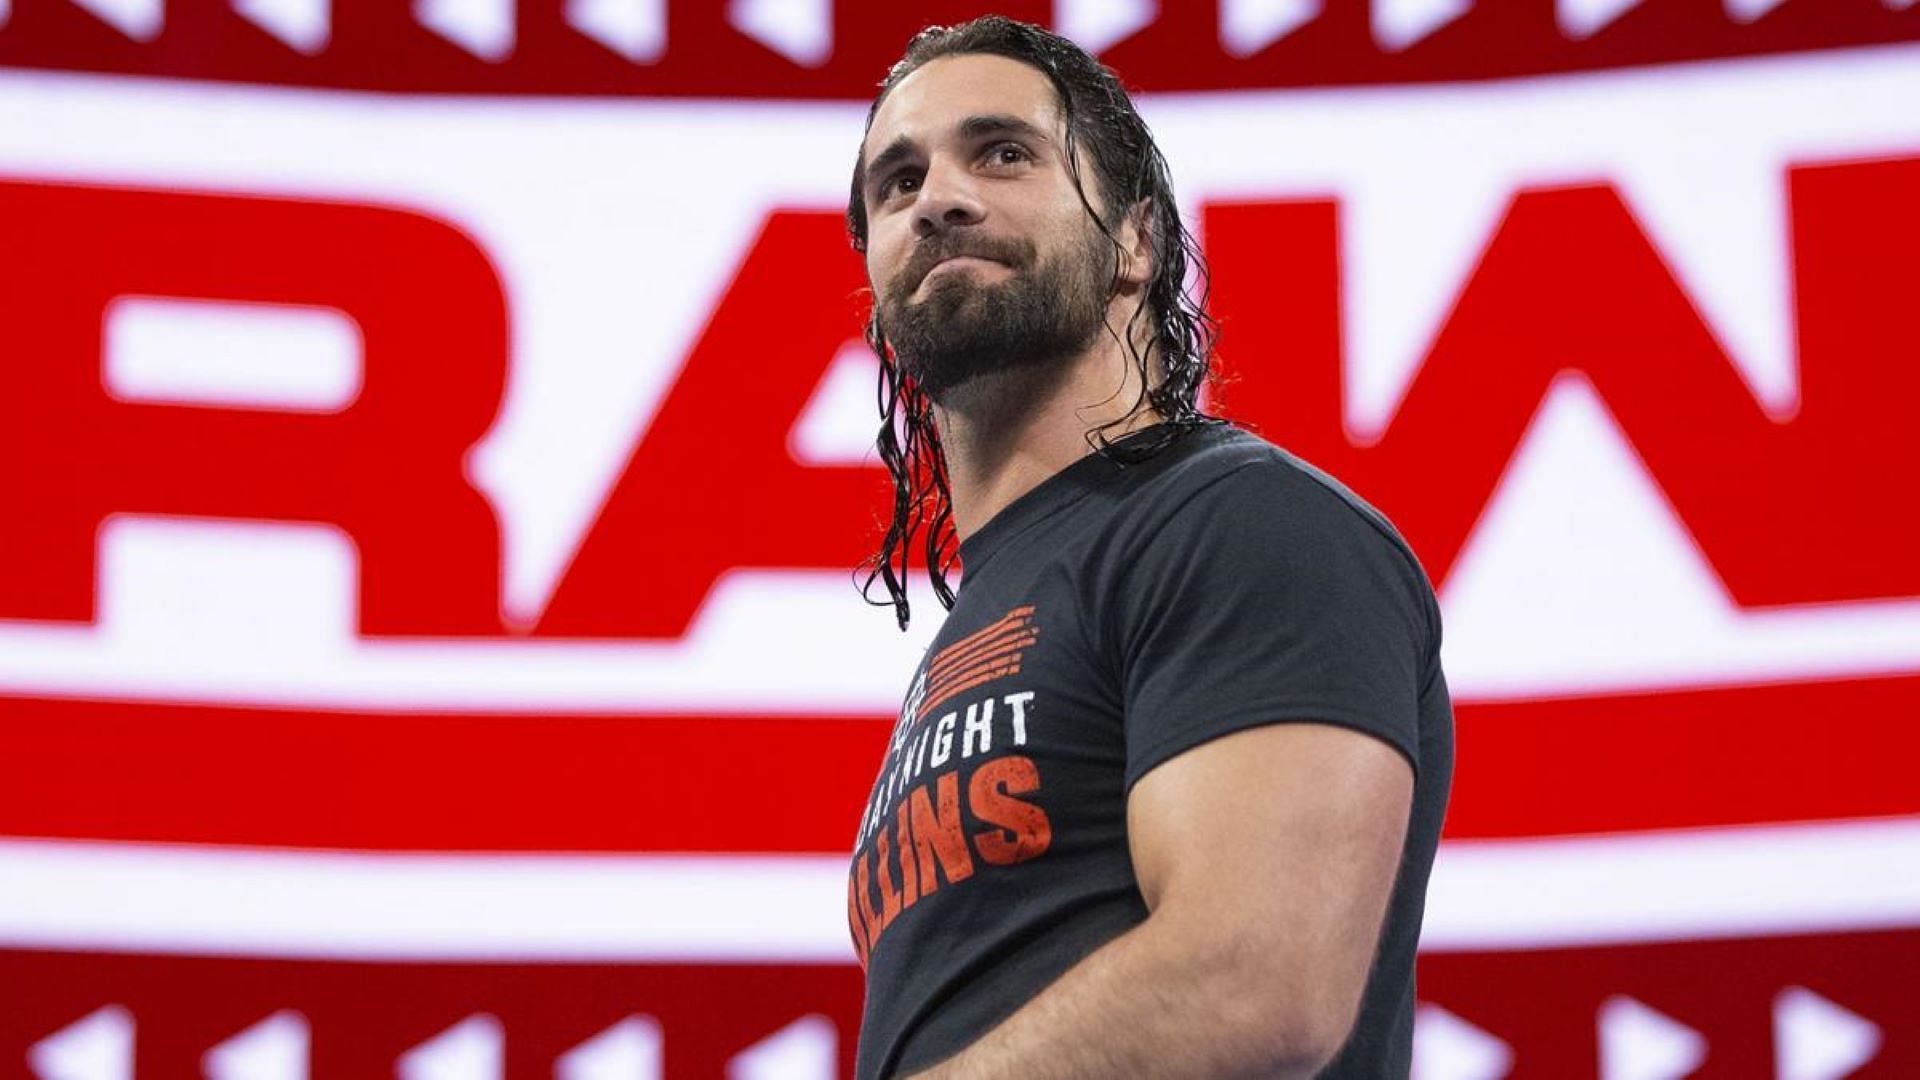 Seth Rollins has had one of the best careers of any NXT call up